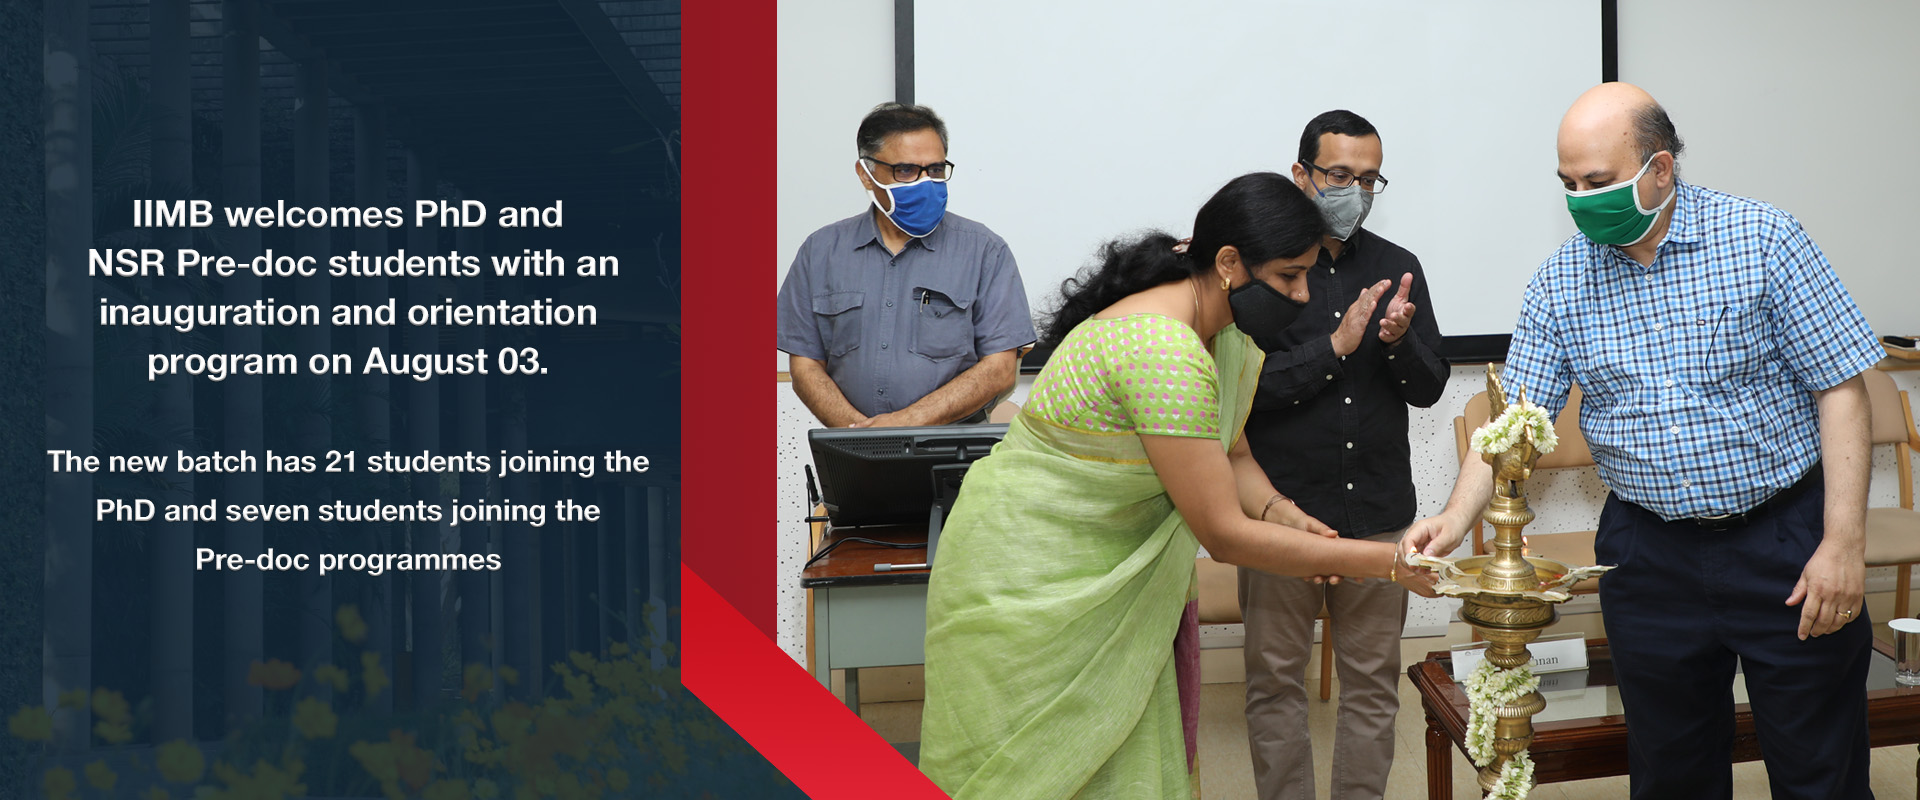 IIMB welcomes PhD and NSR Pre-doc students with an inauguration and orientation program on August 03